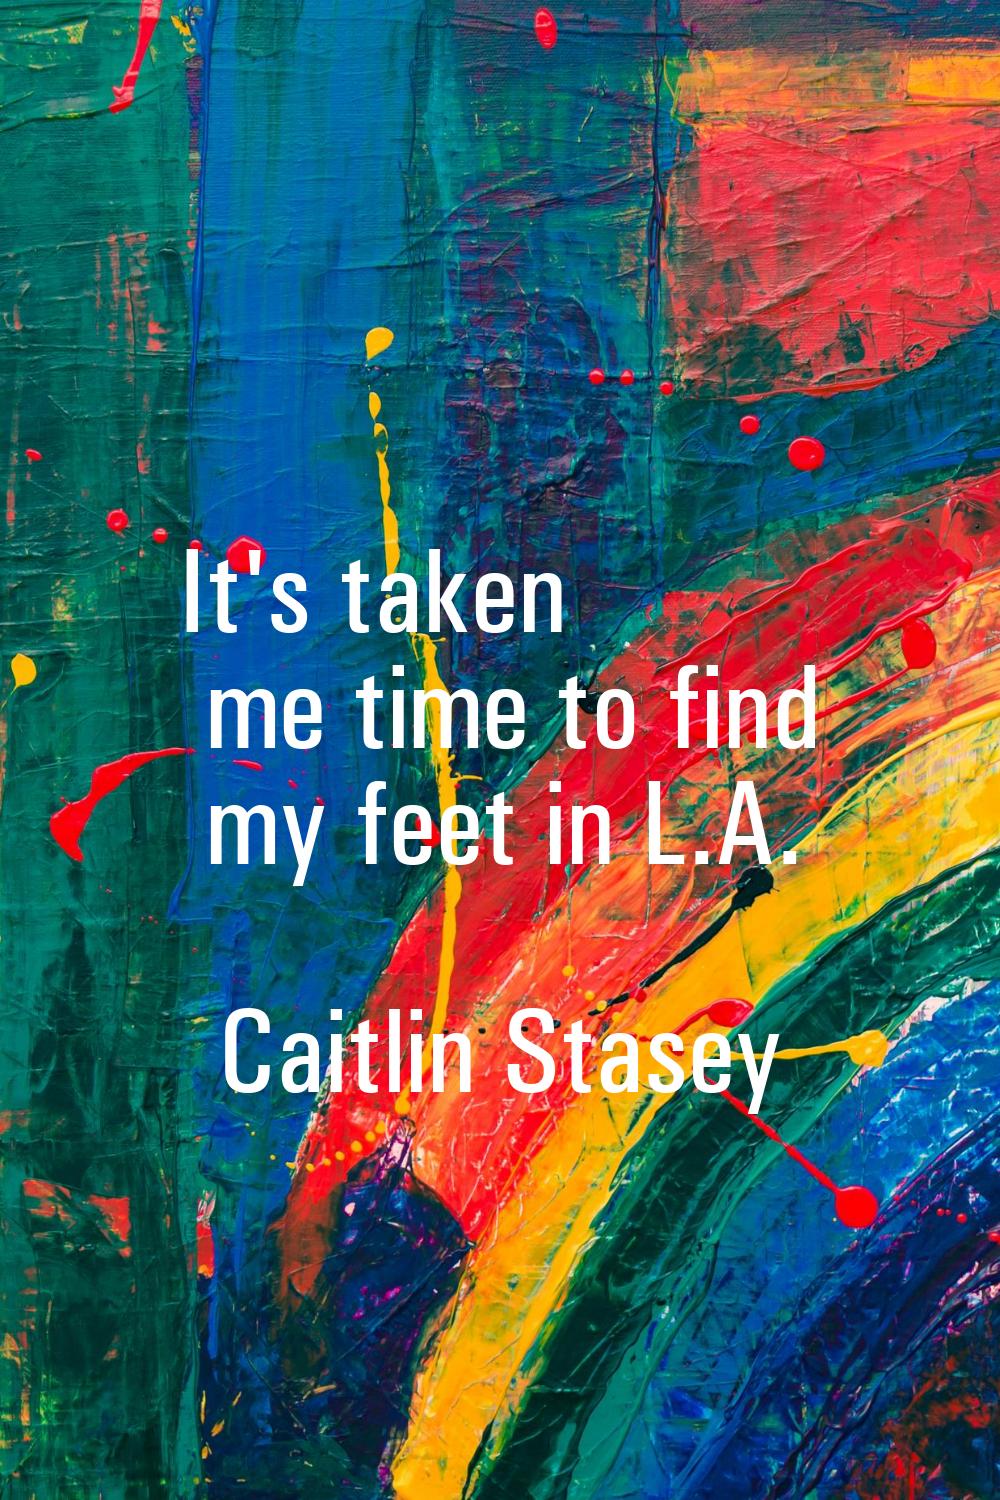 It's taken me time to find my feet in L.A.